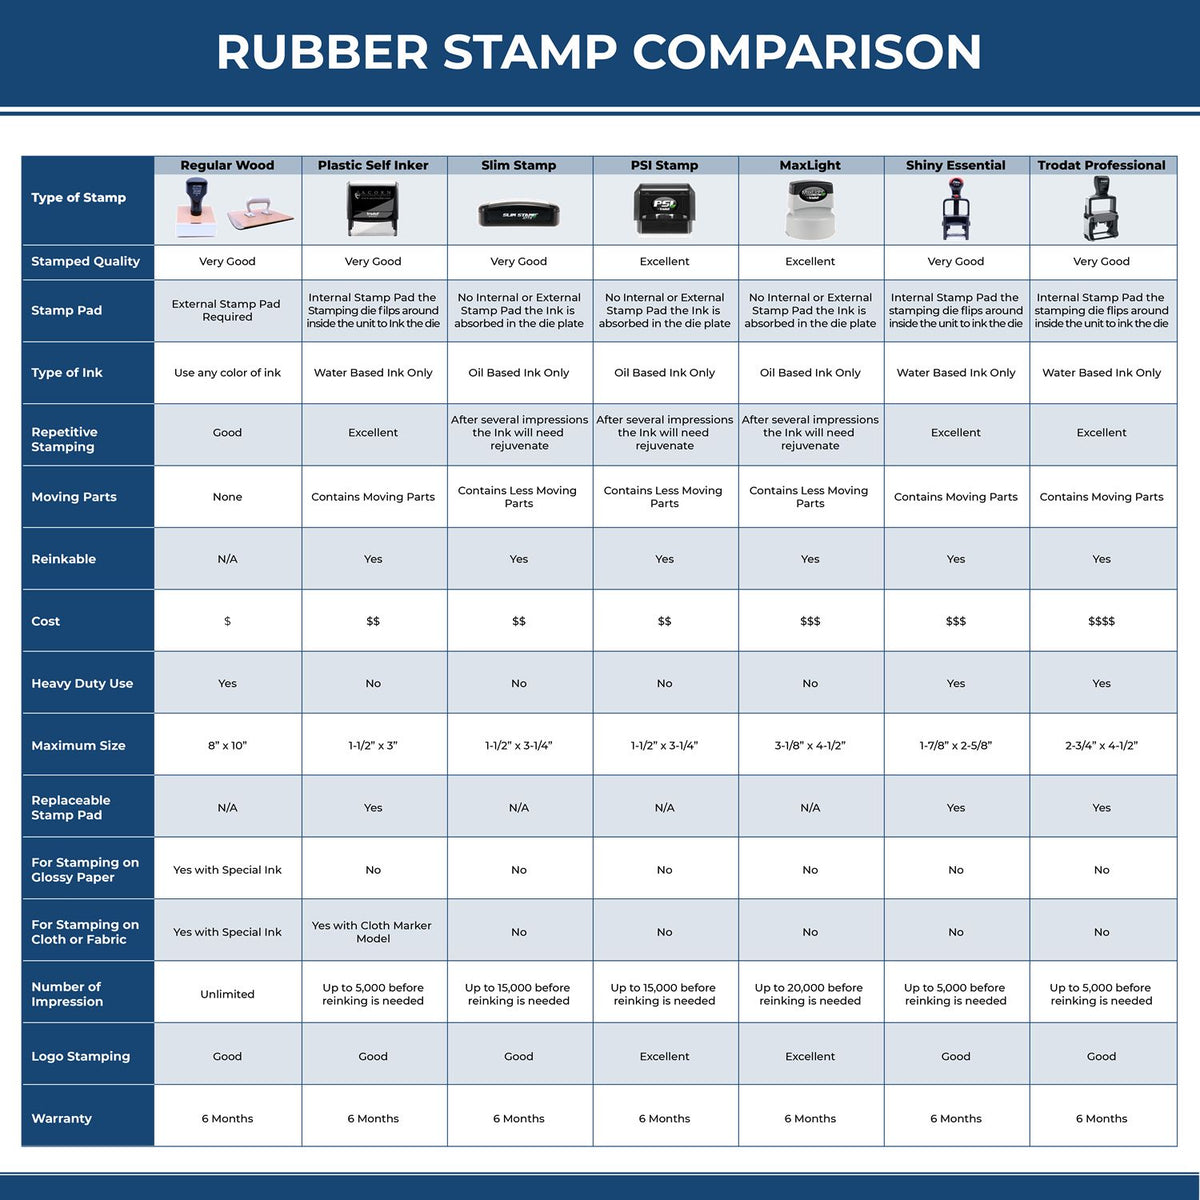 A comparison chart for the different types of mount models available for the MaxLight Premium Pre-Inked New York State Seal Notarial Stamp.